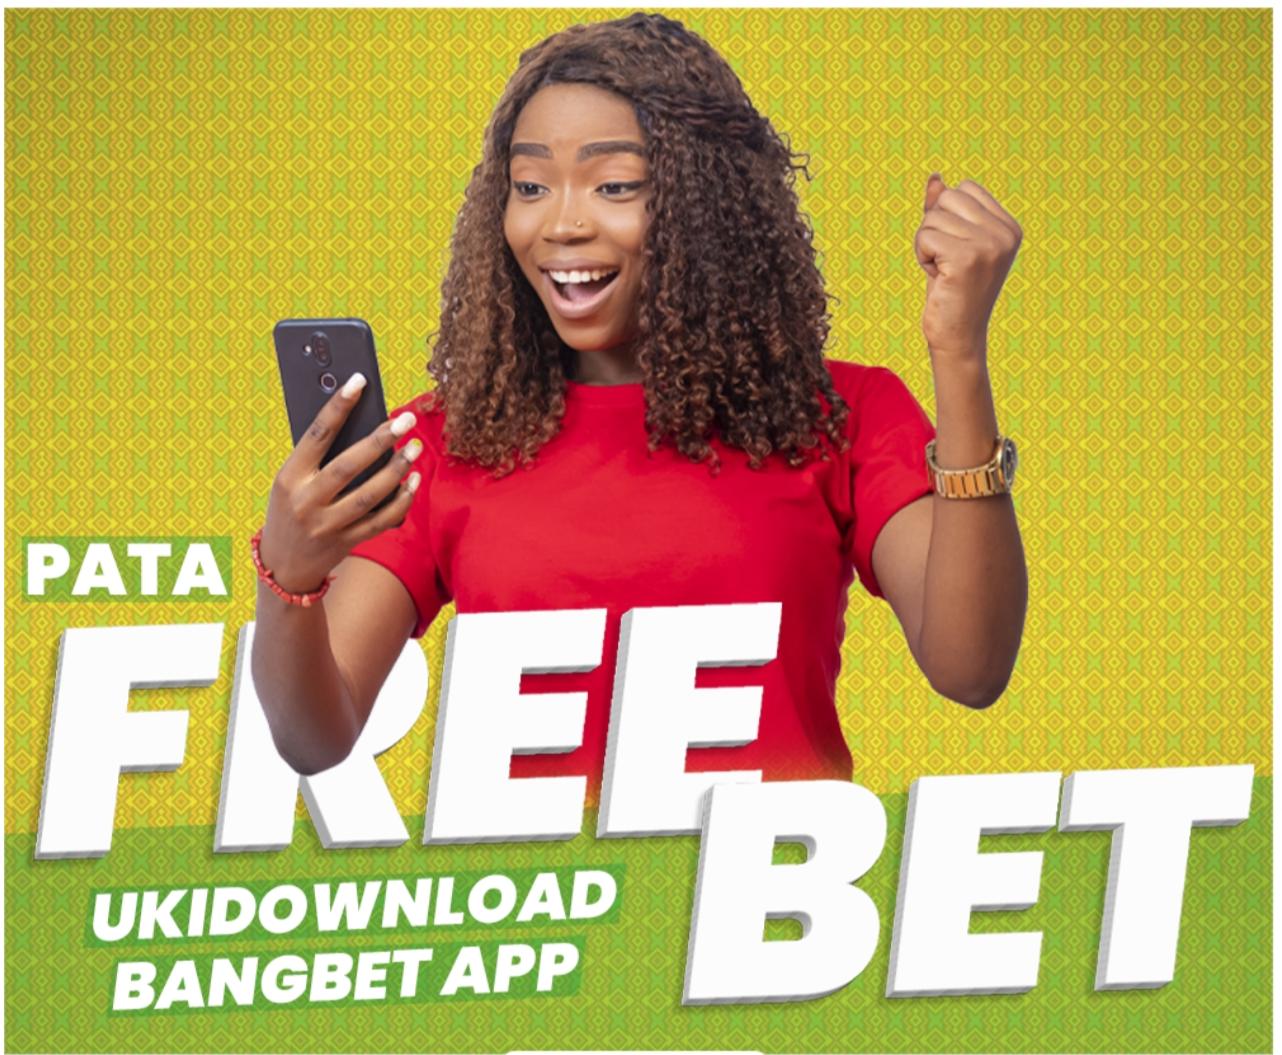 Free bets at Bangbet, a strategy to start freely